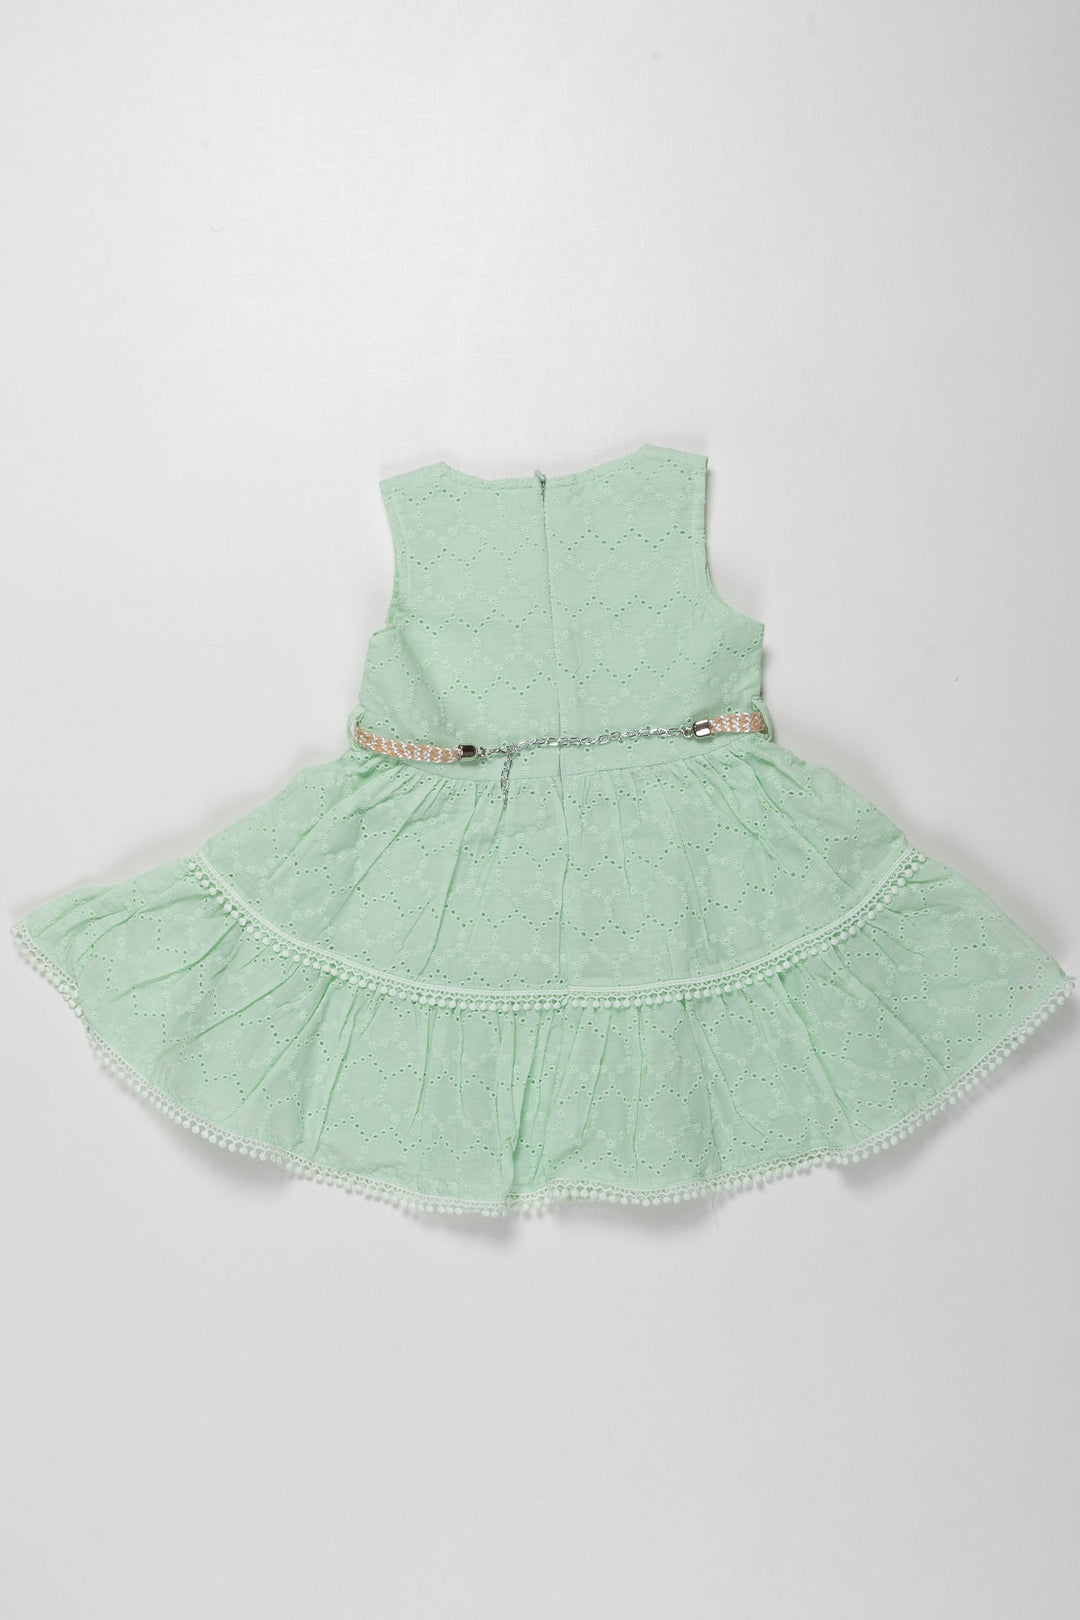 The Nesavu Baby Cotton Frocks Enchanted Mint Green Baby Girl Cotton Frock - Breathable & Chic Nesavu Baby Girls Mint Green Summer Frock | Cotton Comfort & Style | The Nesavu